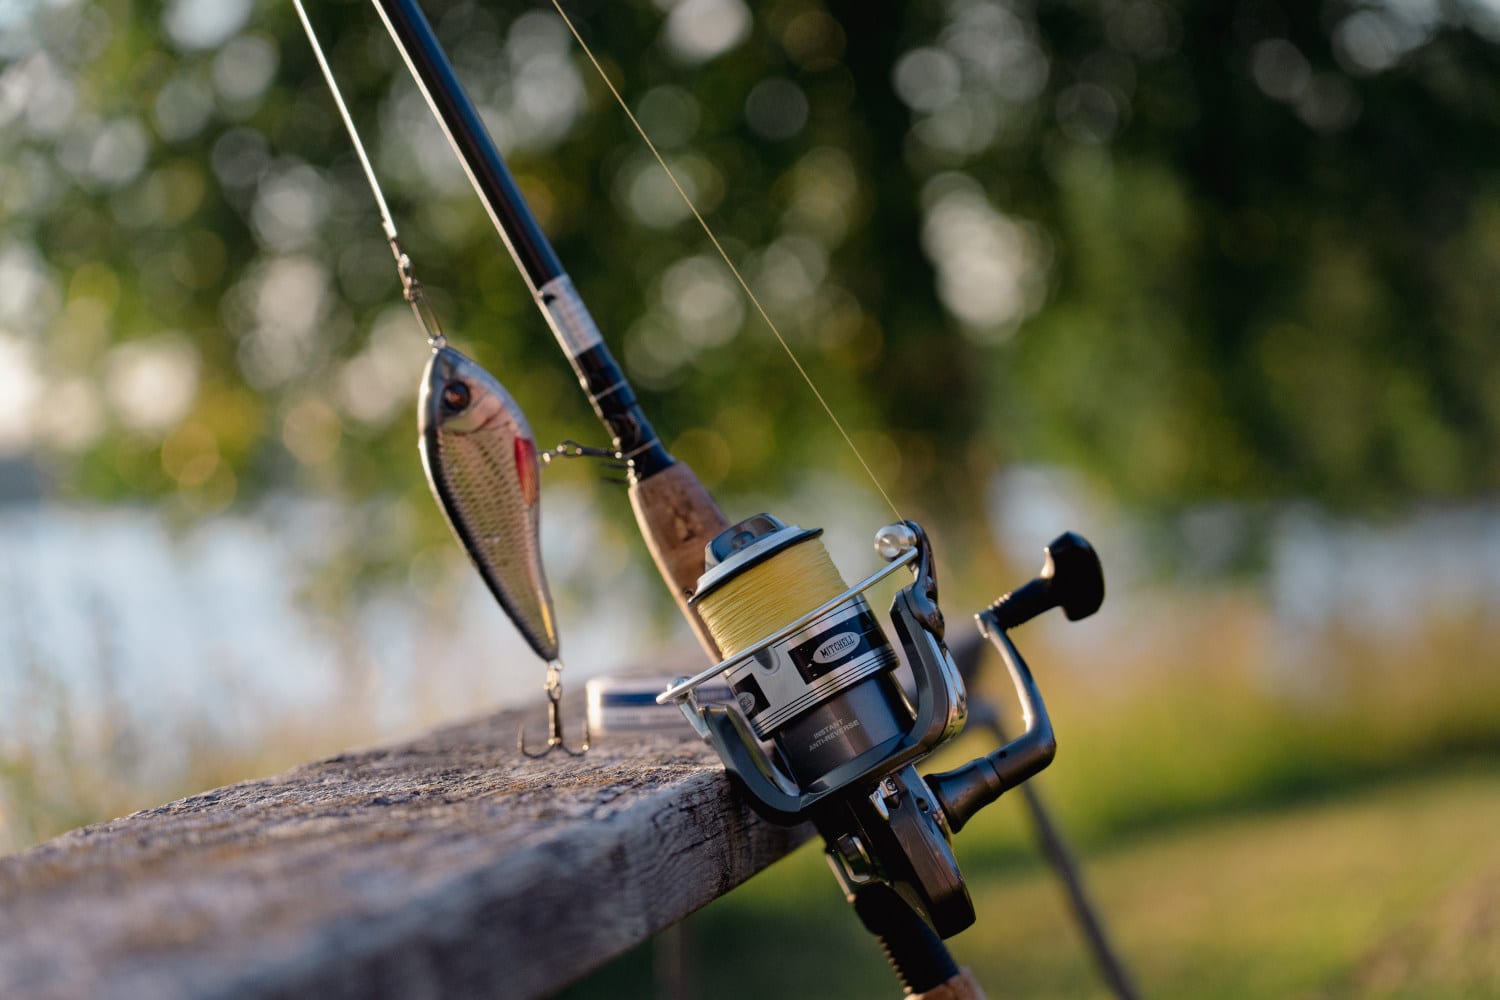 https://thewildprovides.com/wp-content/uploads/2023/01/spinning-rod-1500.jpg